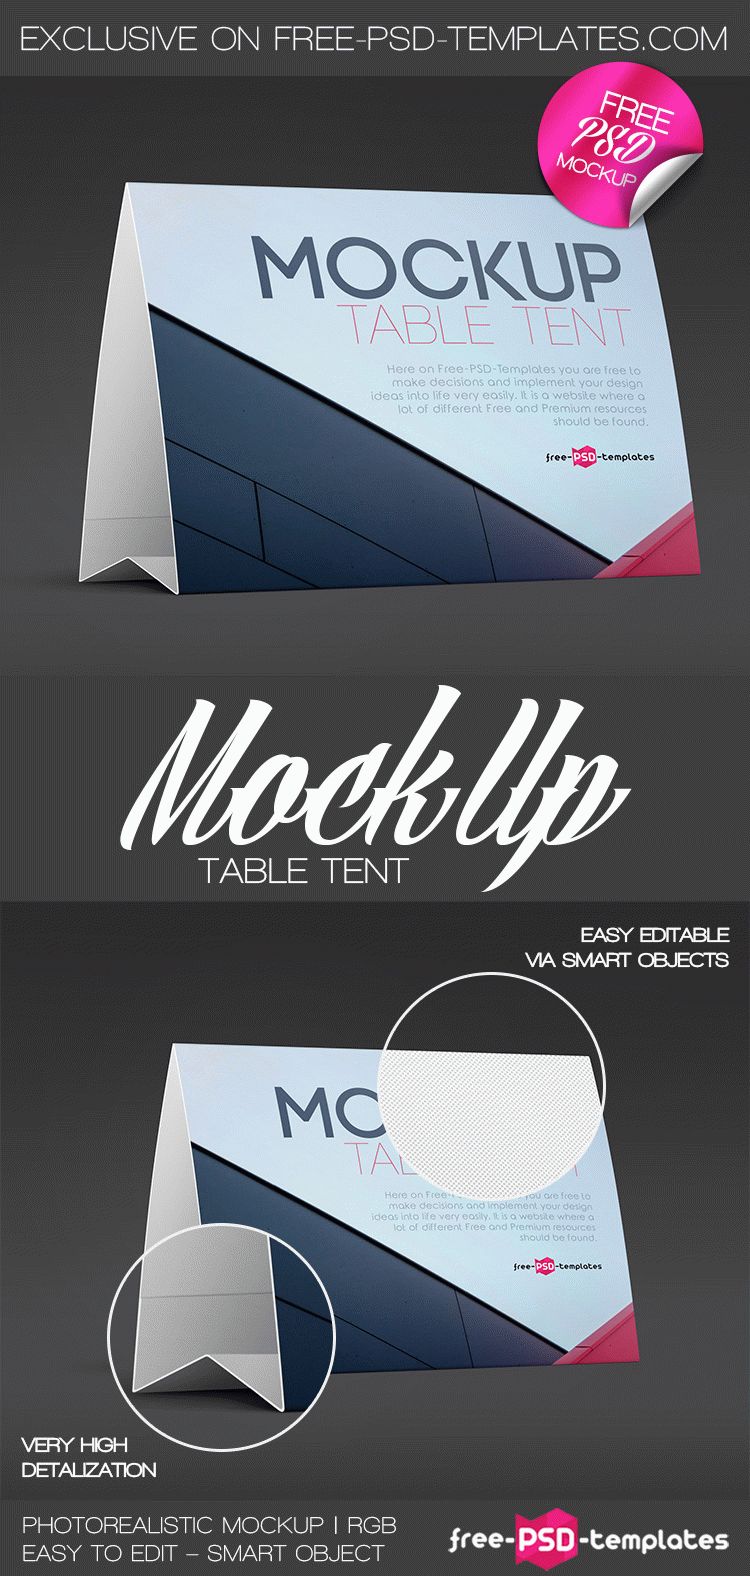 Download Free Table Tent Mock-up in PSD | Free PSD Templates